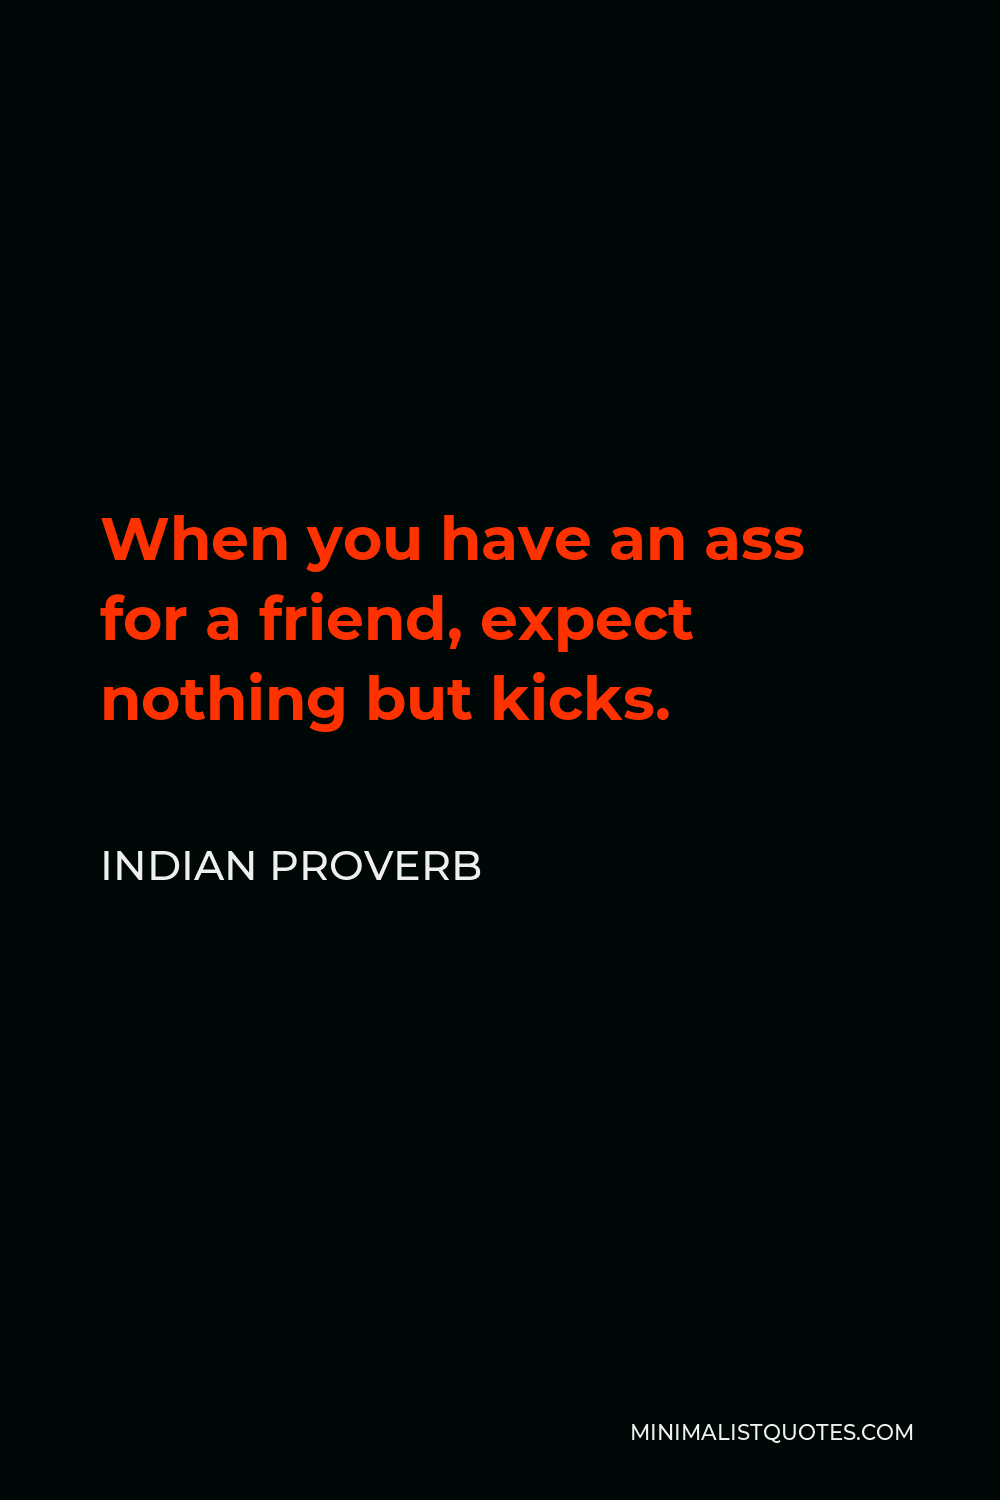 Indian Proverb Quote - When you have an ass for a friend, expect nothing but kicks.